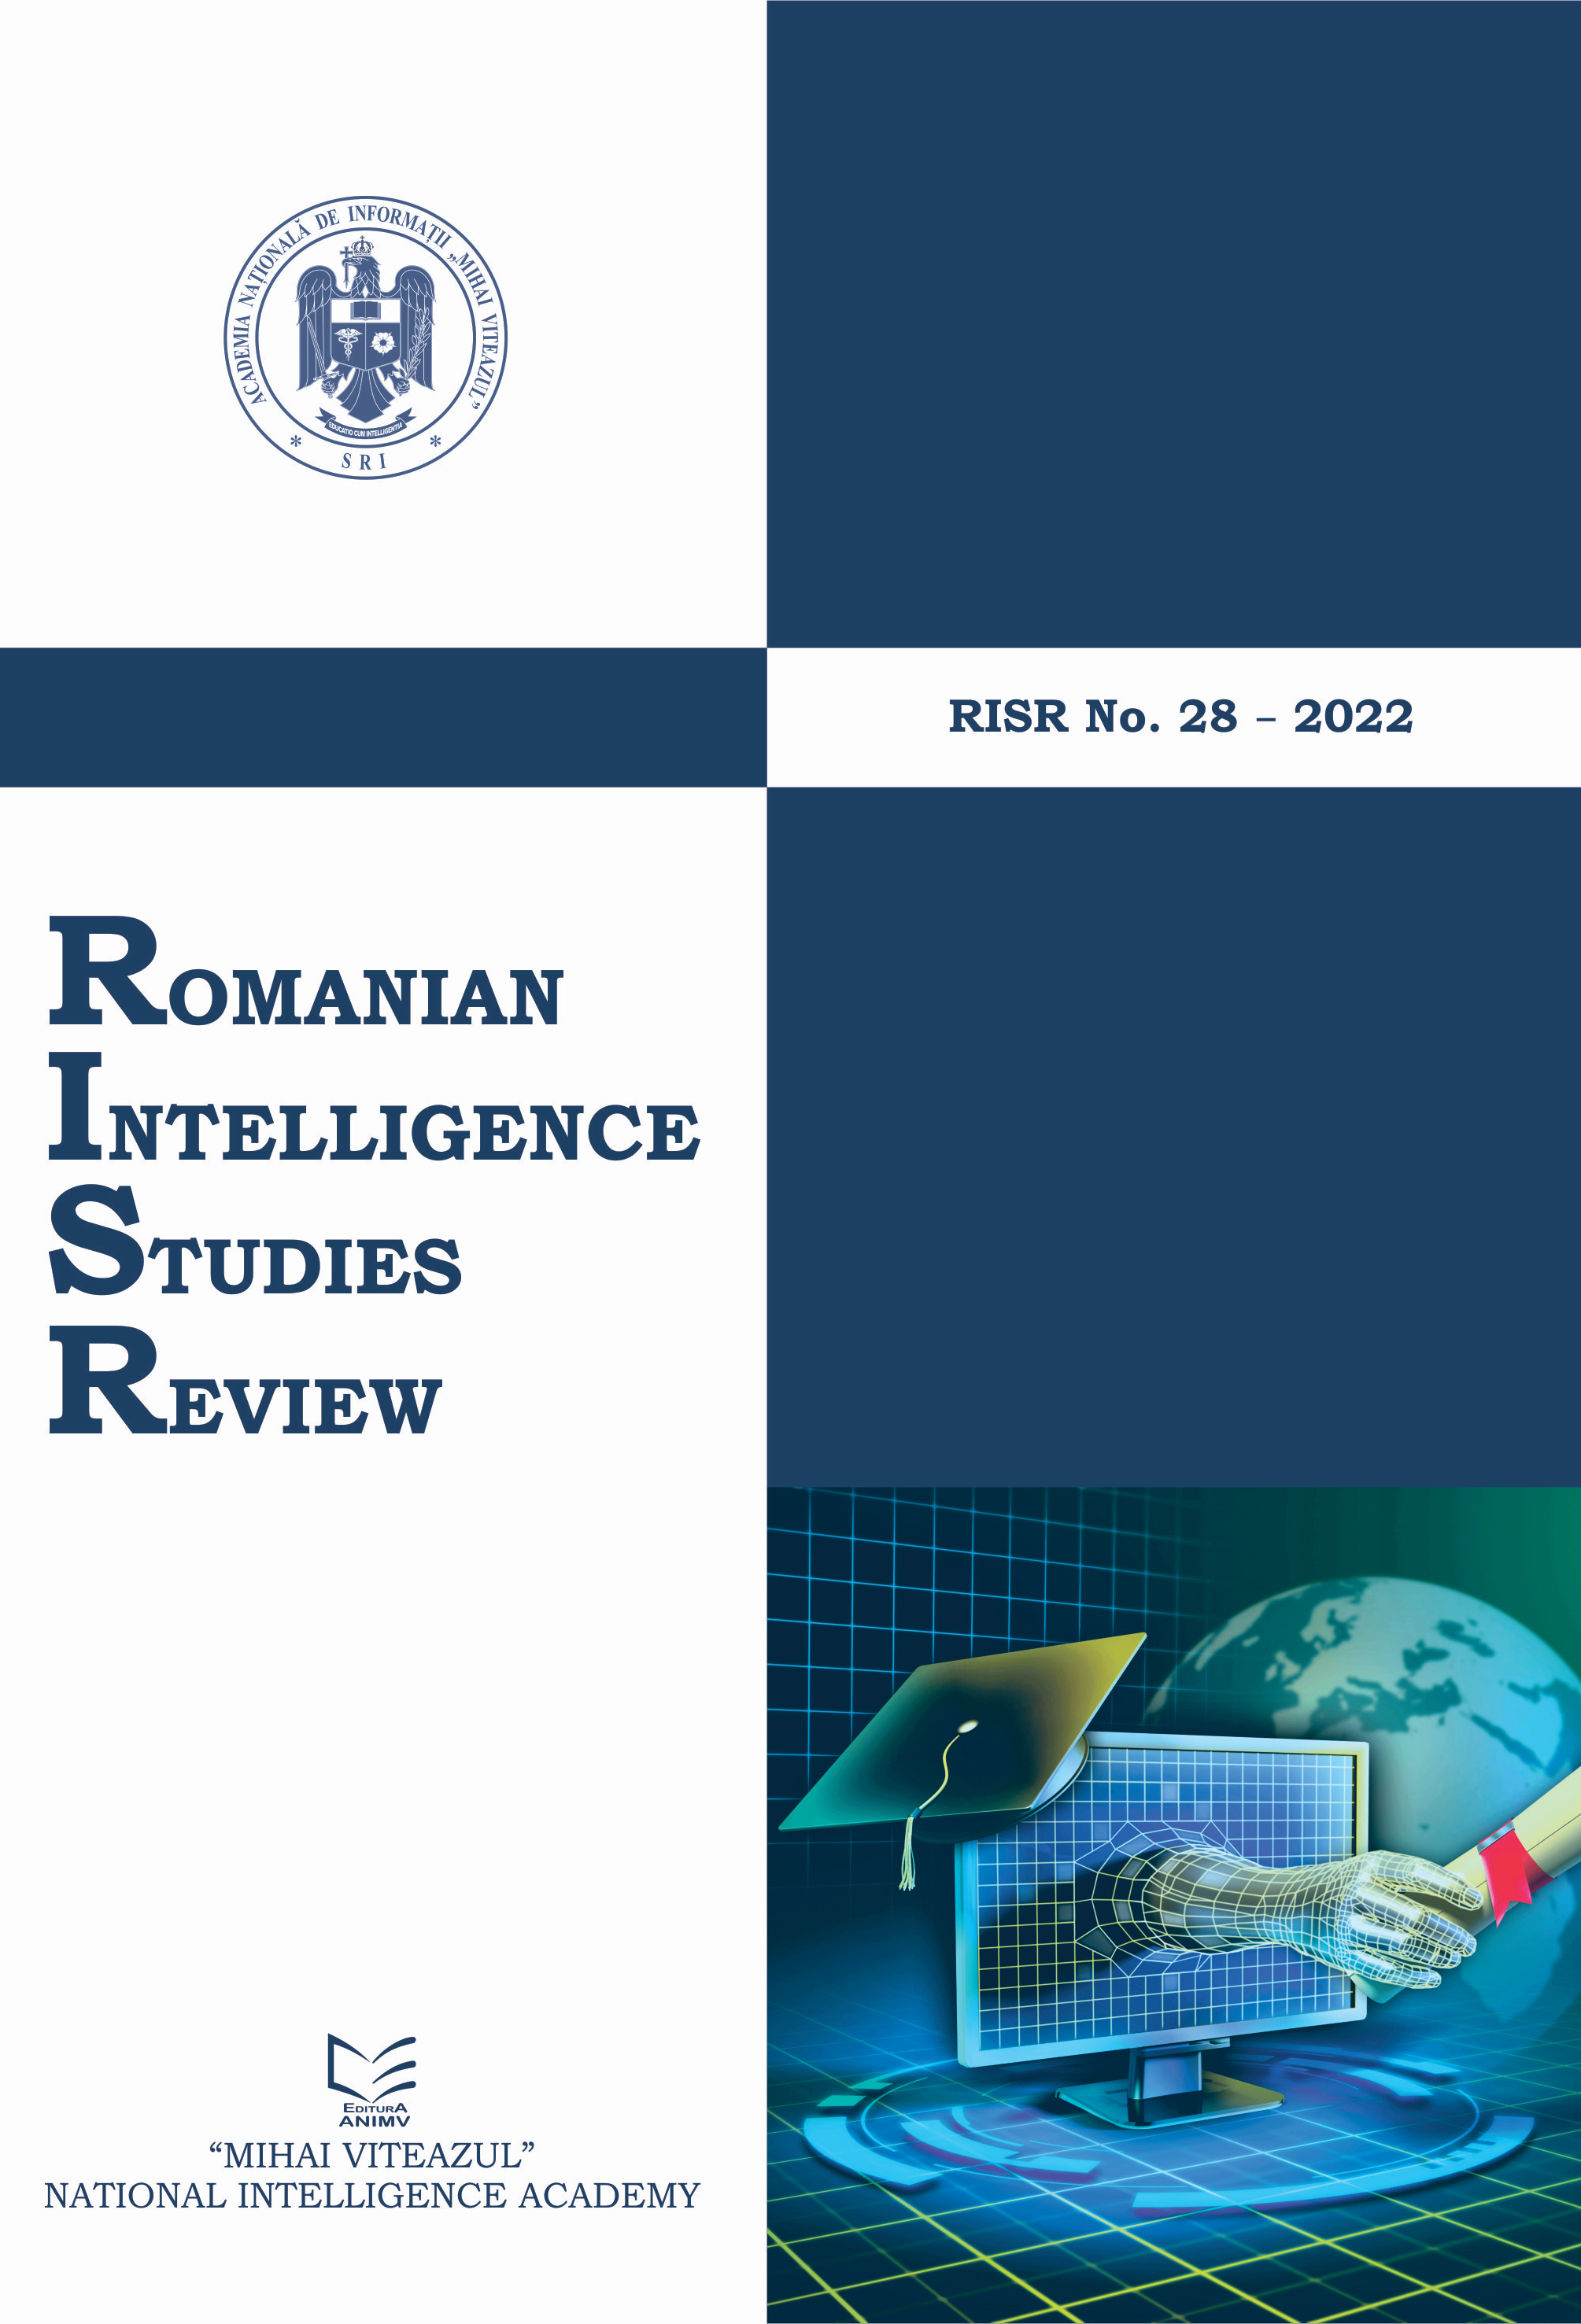 The First Modern Romanian Intelligence School Mvnia 30th Anniversary. The message of the Rector of the “Mihai Viteazul” National Intelligence Academy, Professor Adrian-Liviu IVAN Cover Image